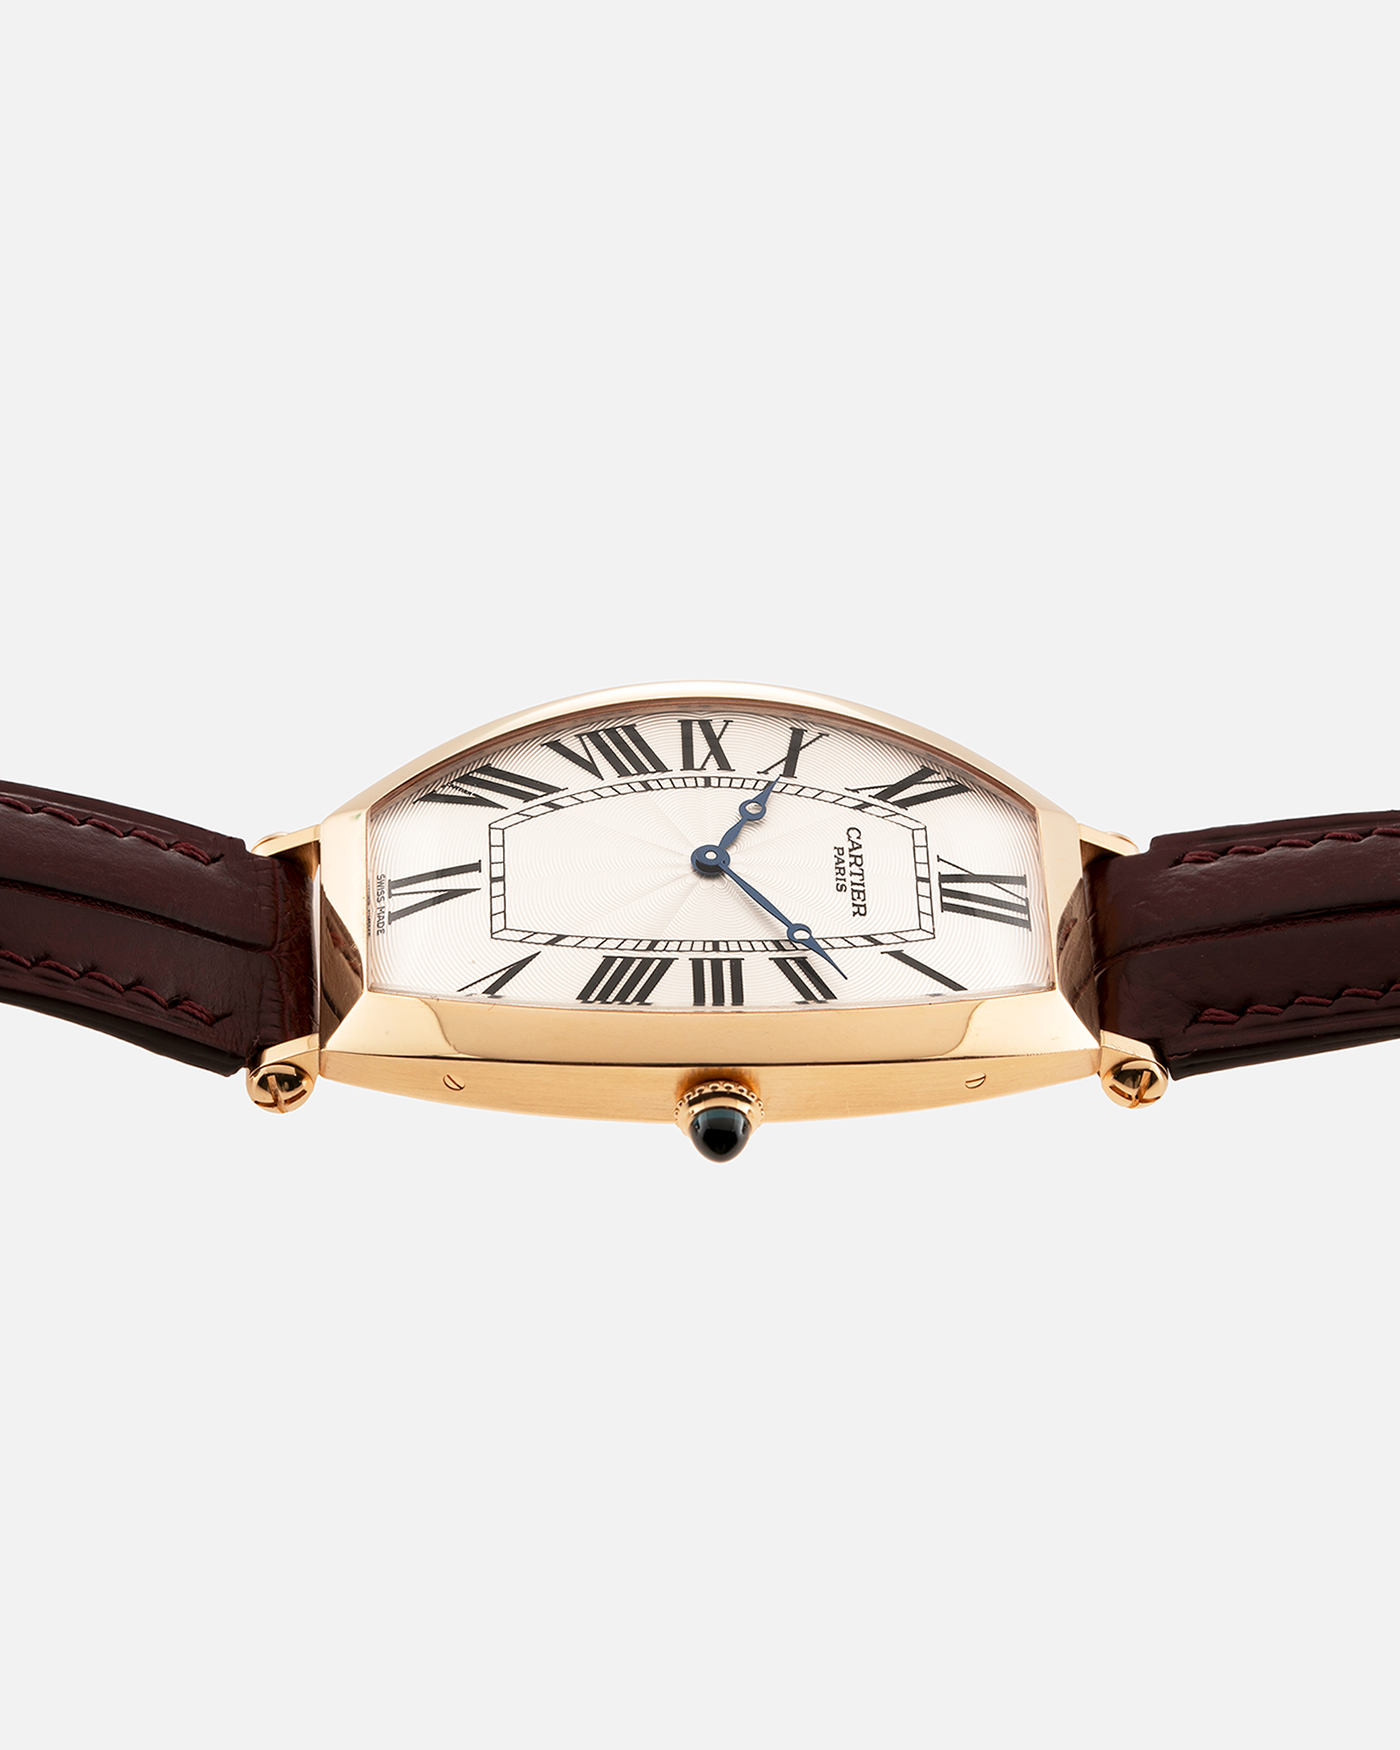 Brand: Cartier Year: 2006 Model: CPCP Collection Prive Tonneau XL Reference: 2802H Material: 18k Rose Gold Movement: Can 9790MC Case Diameter: 43.4mmX29.4mm Strap: Cartier Oxblood Alligator Strap with 18k Rose Gold Deployant Clasp